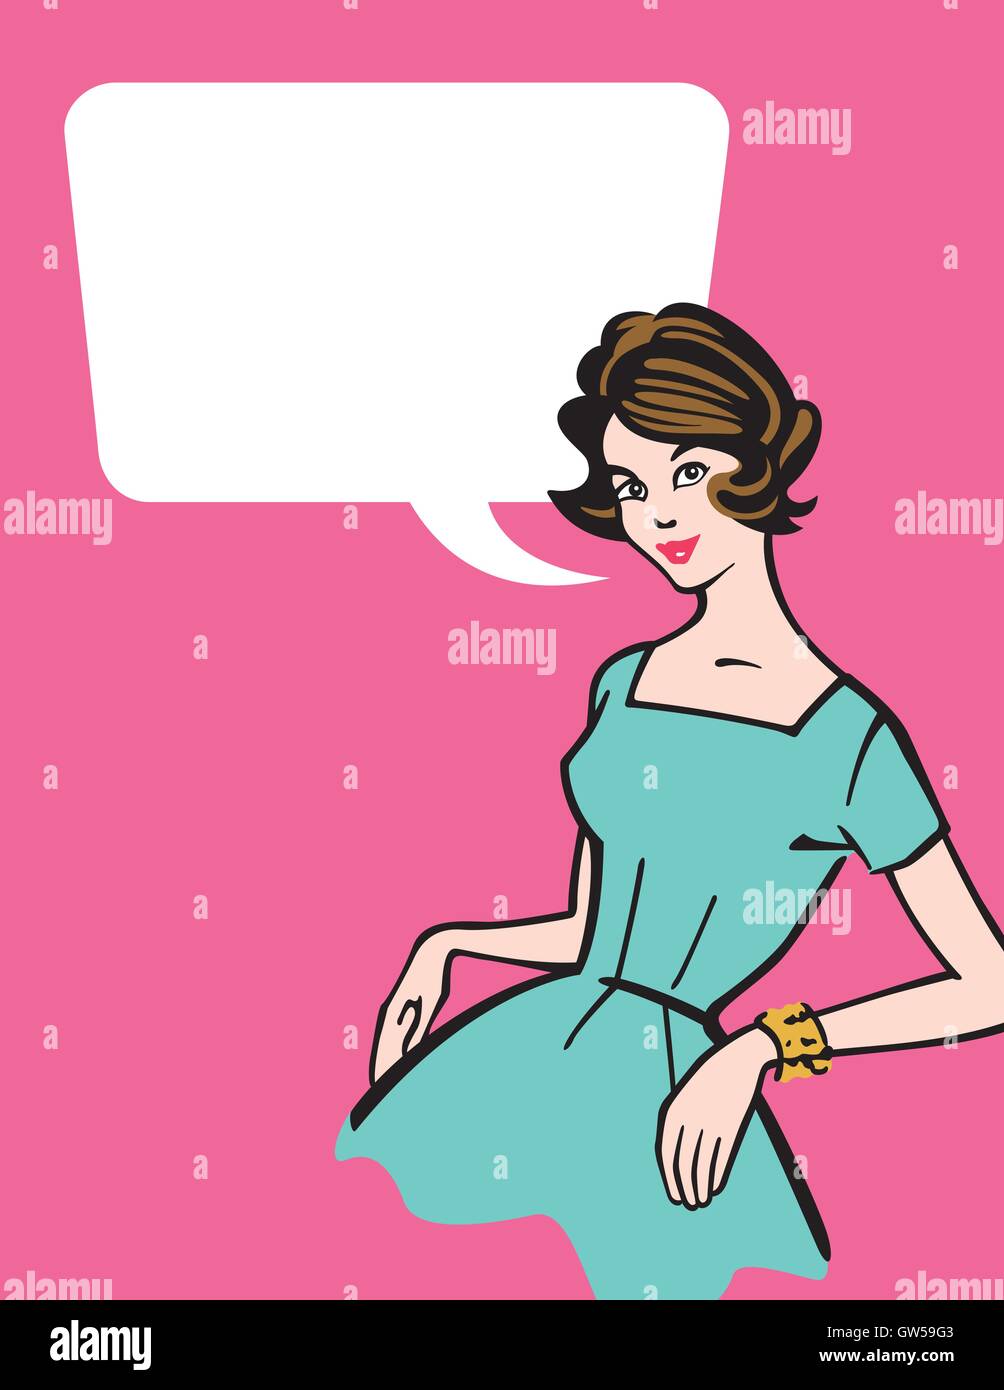 Retro 1950s Housewife vector design. Classic vintage style housewife illustration with empty speech bubble. Add your own text! Stock Vector